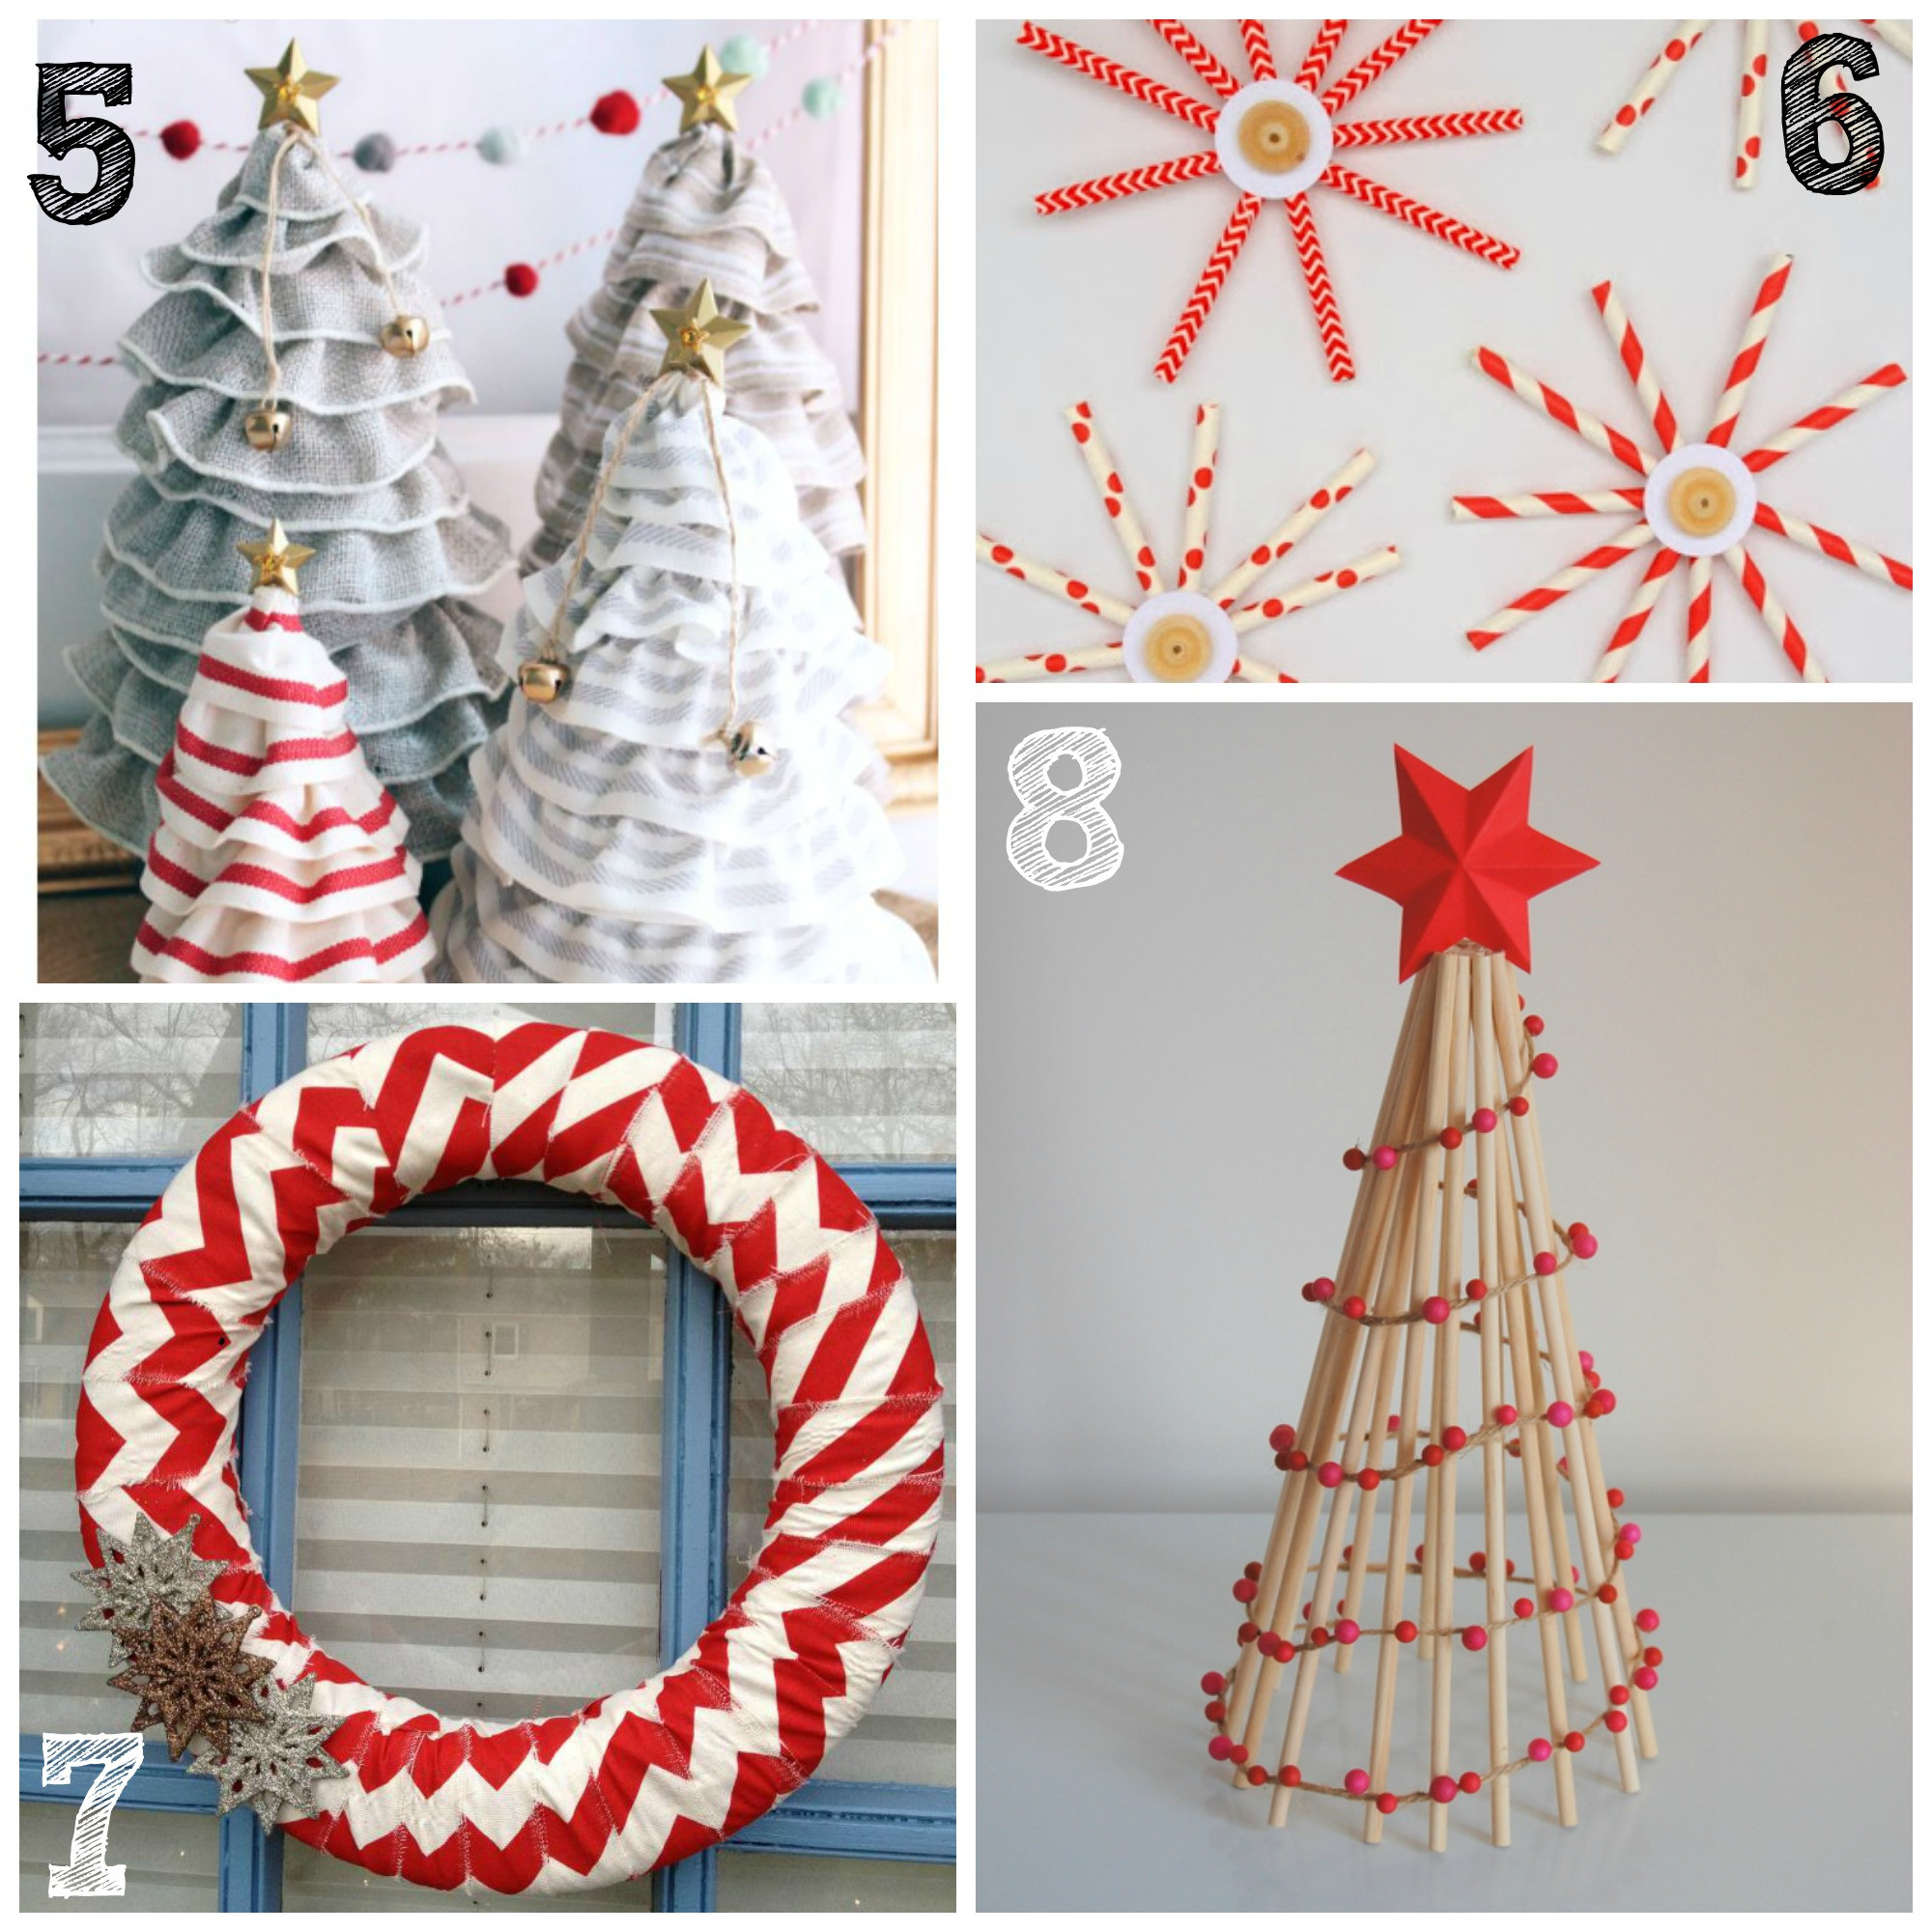 Cool DIY Decorations
 CANT TAKE UR EYES OF THE BEAUTIFUL HANDMADE CHRISTMAS